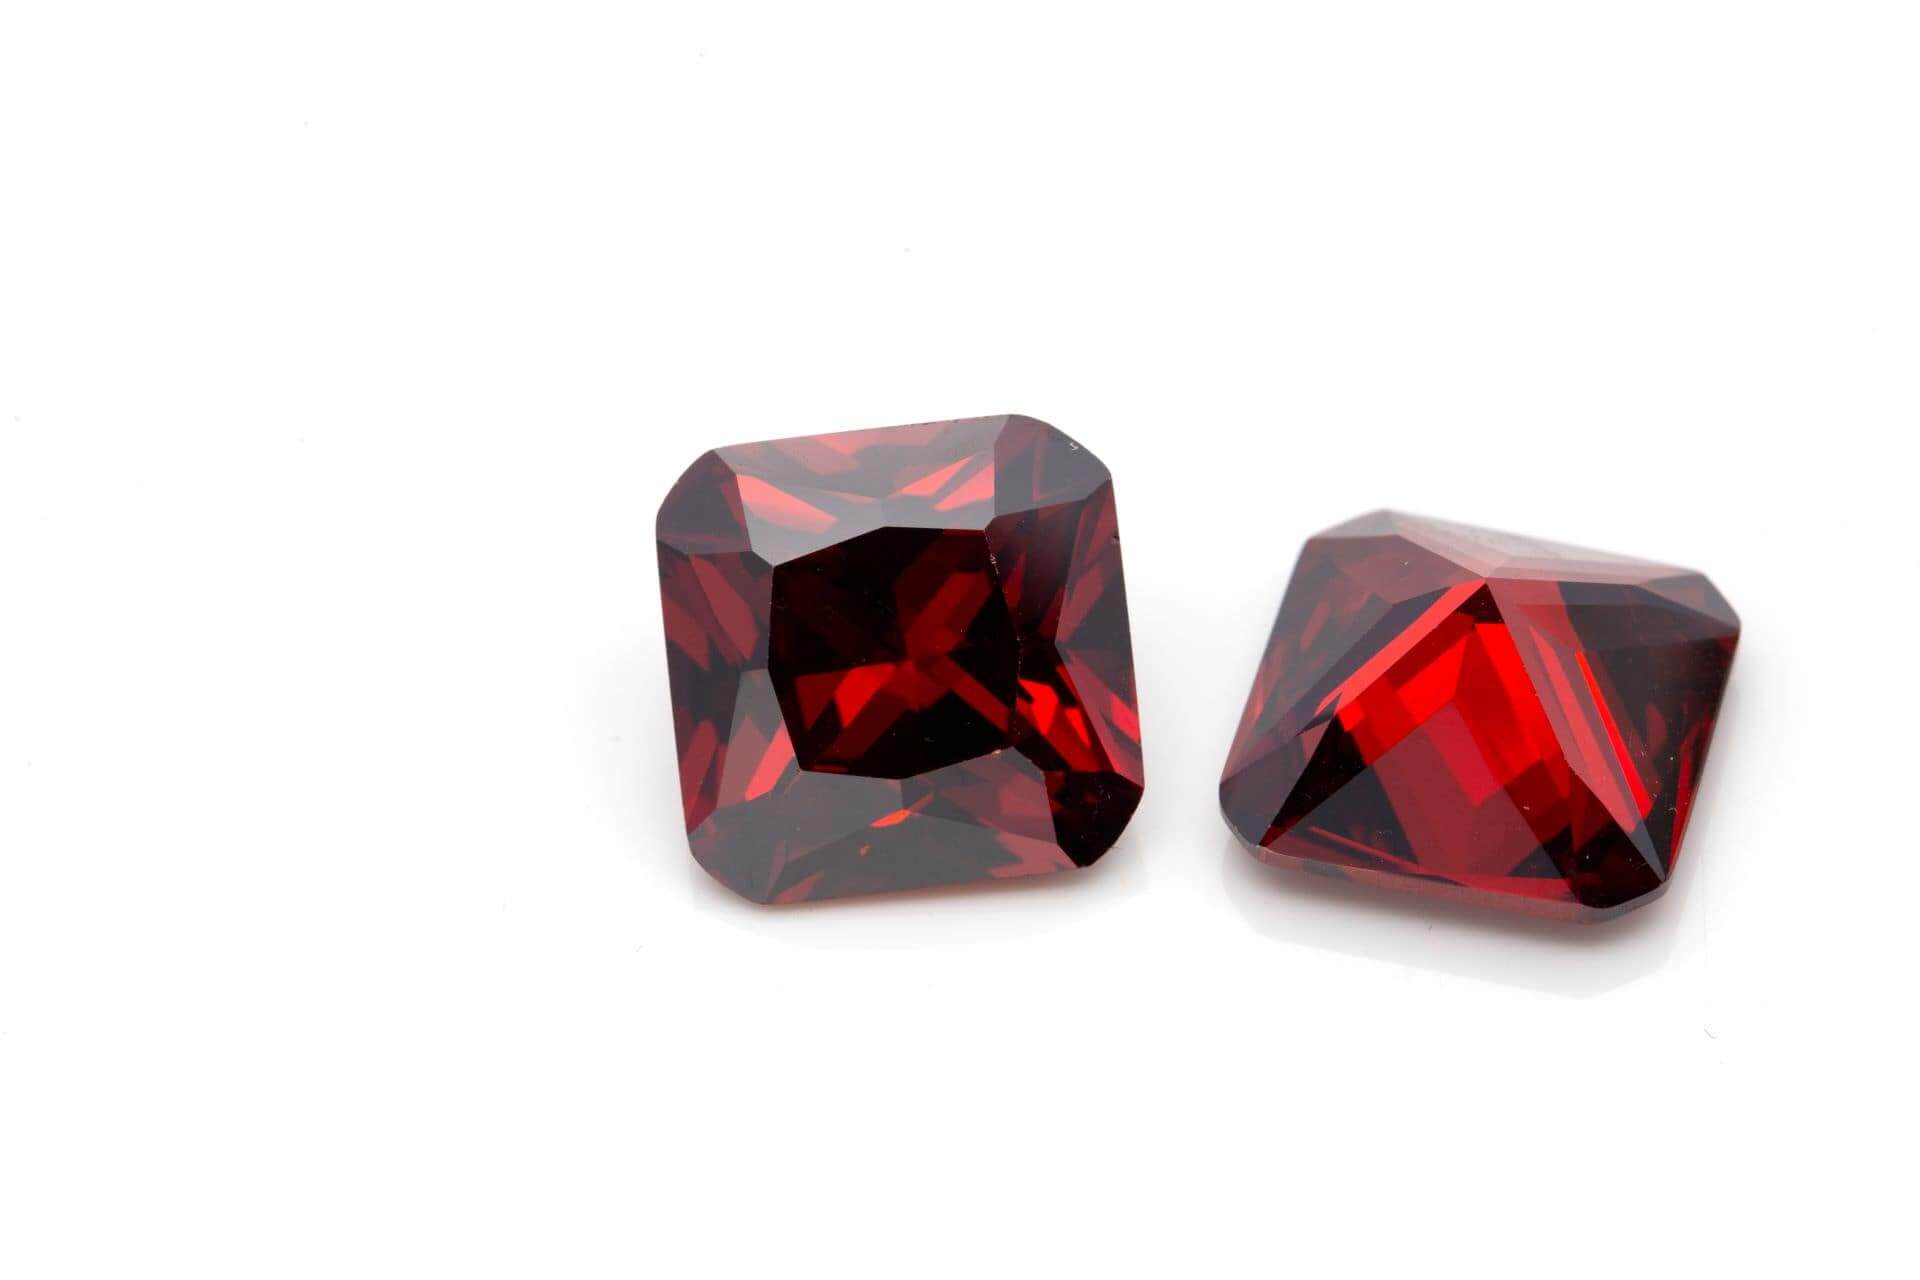 Rubies and Their Notion as Status Symbols